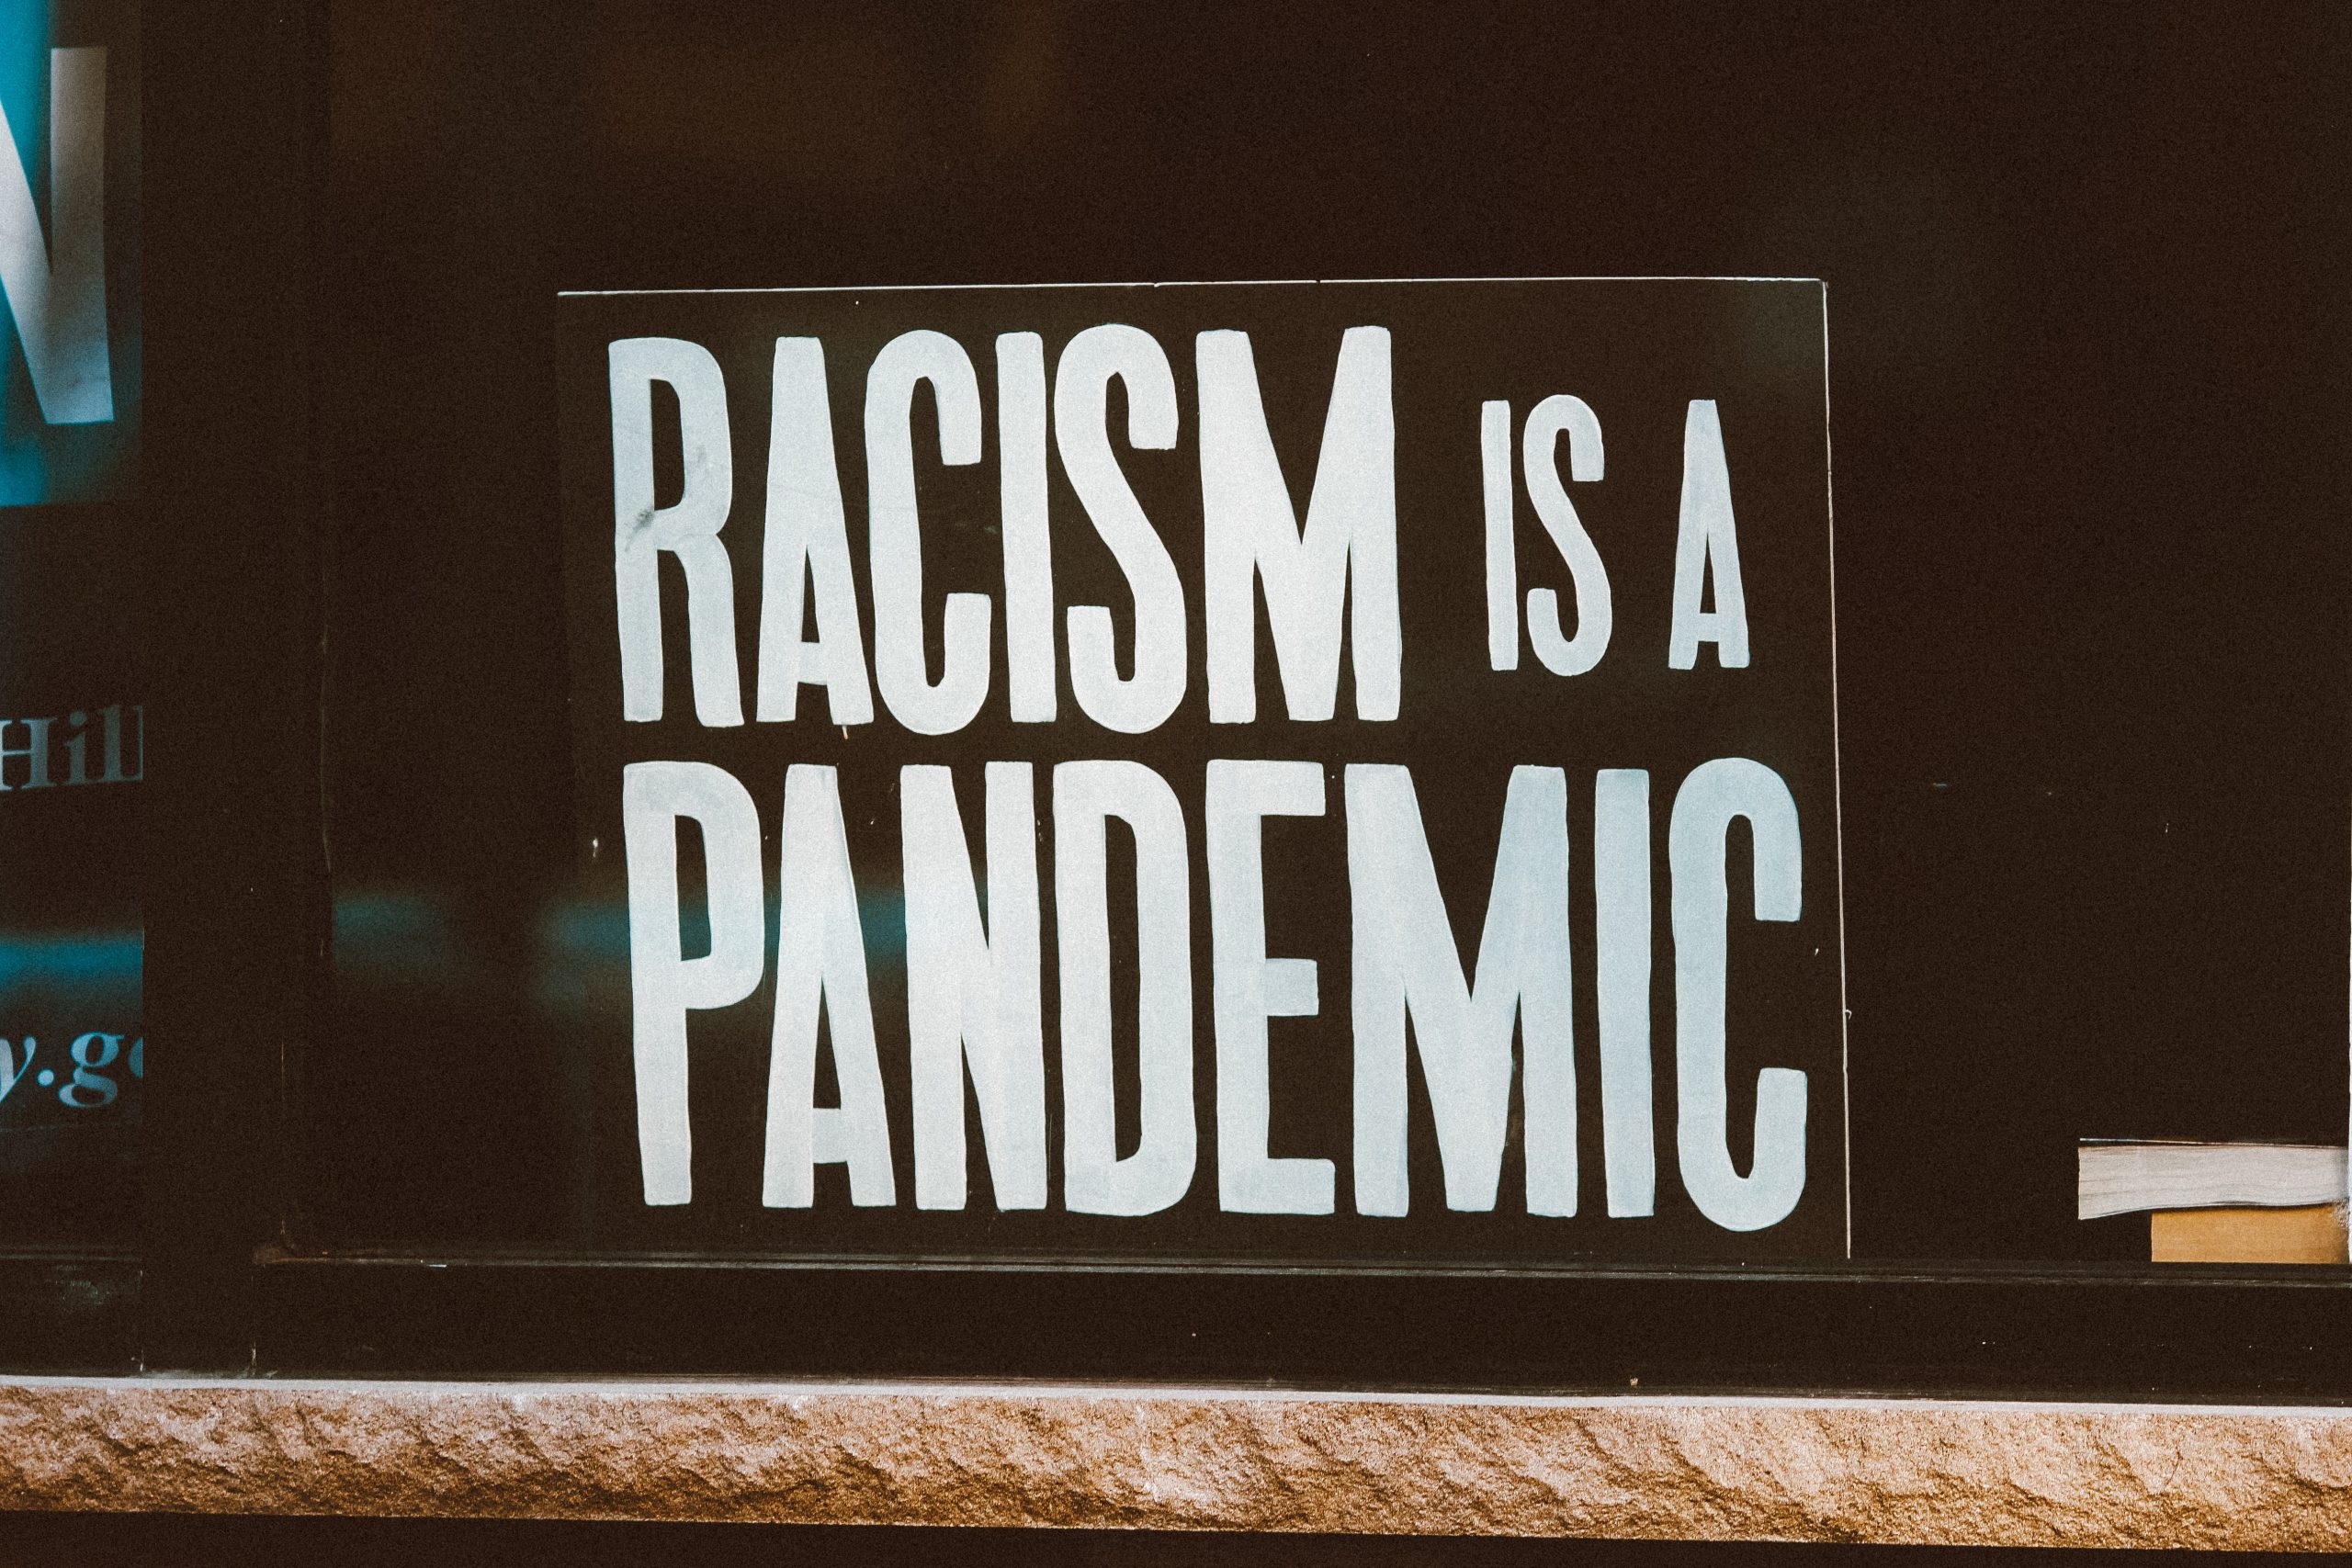 A sign in a widnow reads "Racism is a pandemic" in white lettering on a black background. 